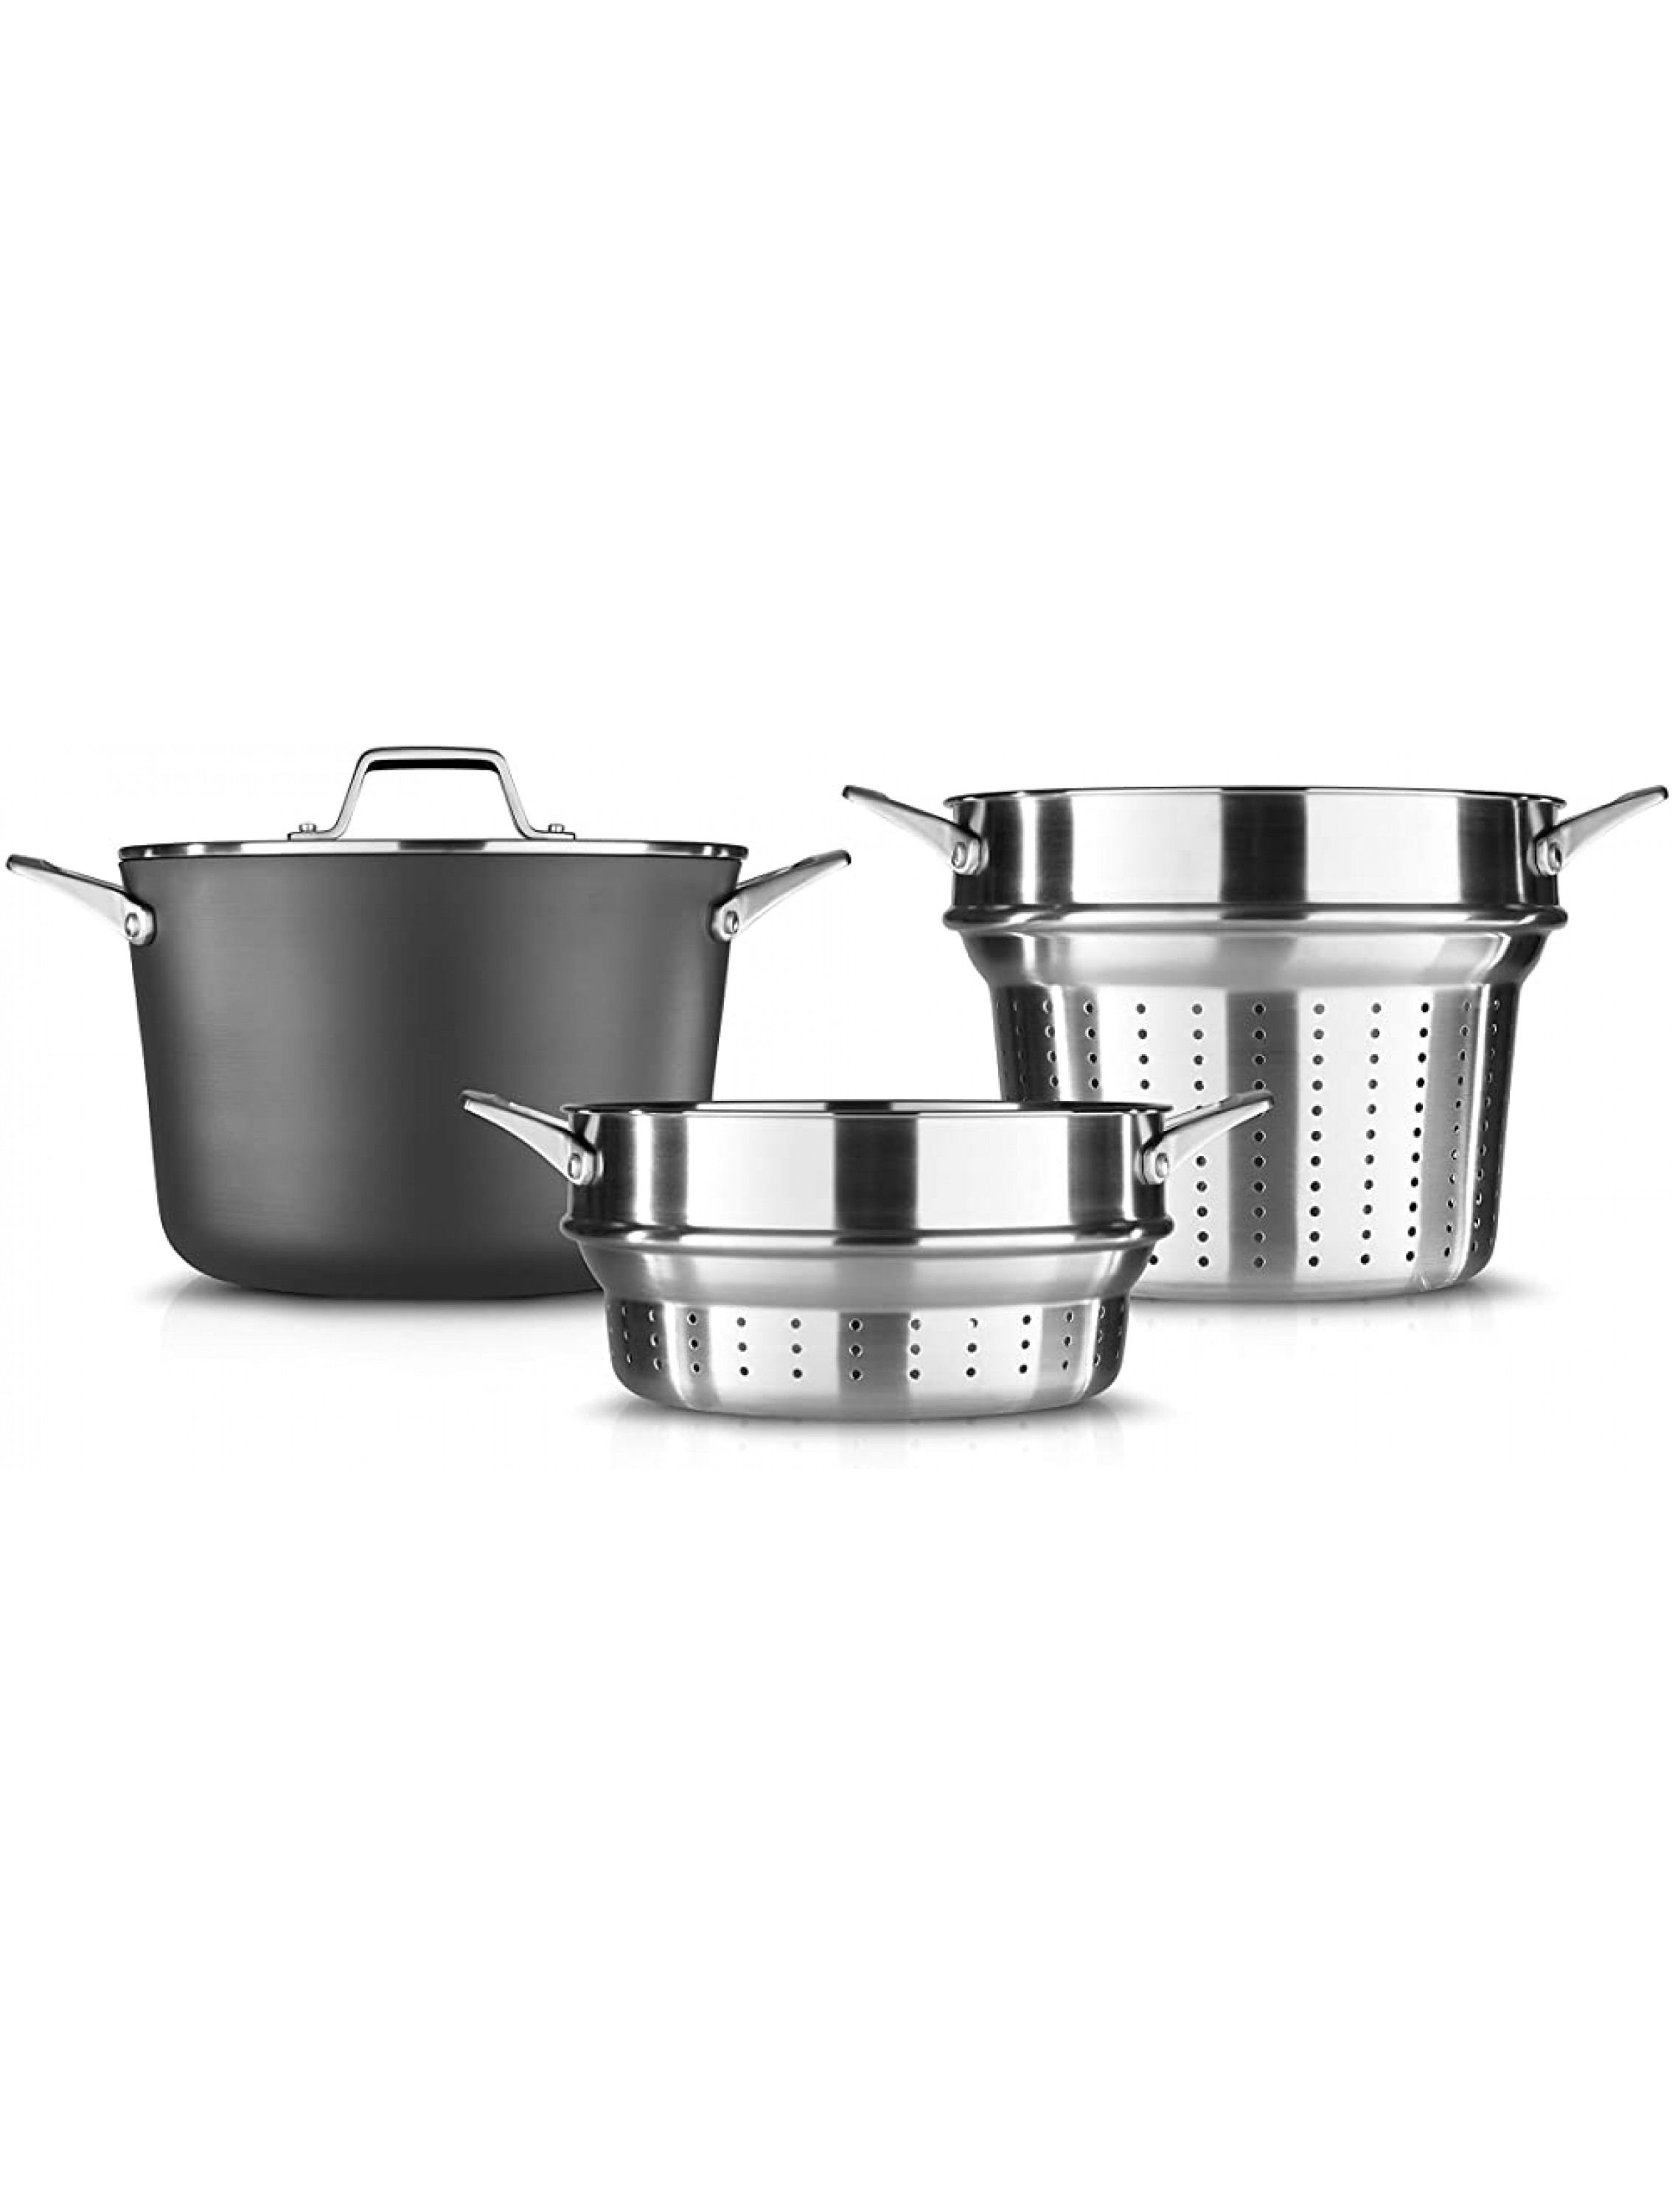 Calphalon Premier Hard-Anodized Nonstick Cookware 8-Quart Multi-Pot with Pasta and Steamer Inserts and Cover - BPOW3YNWT